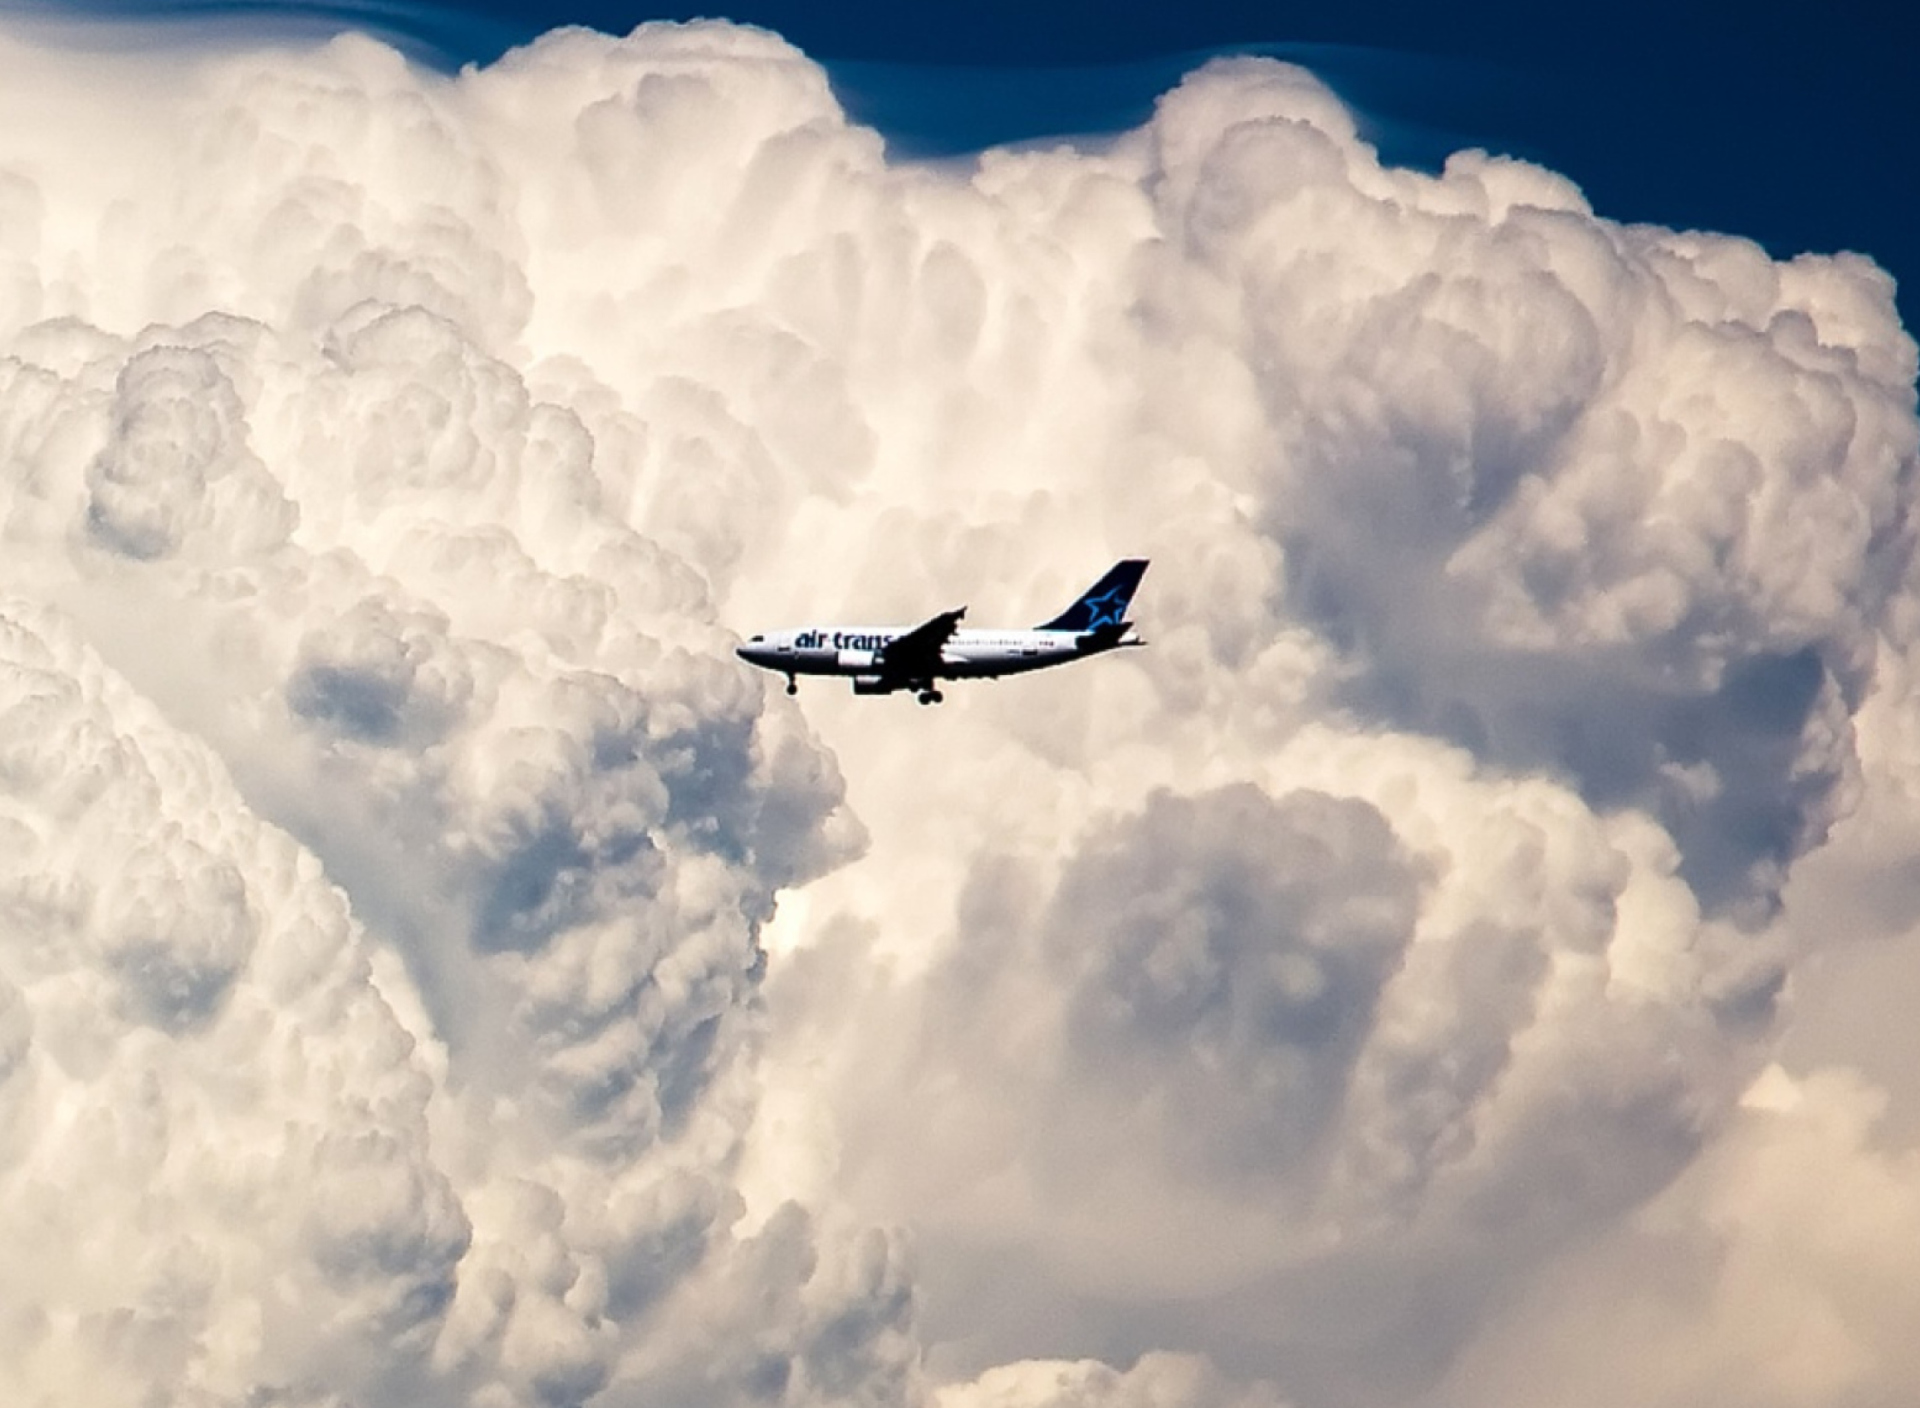 Plane In The Clouds wallpaper 1920x1408